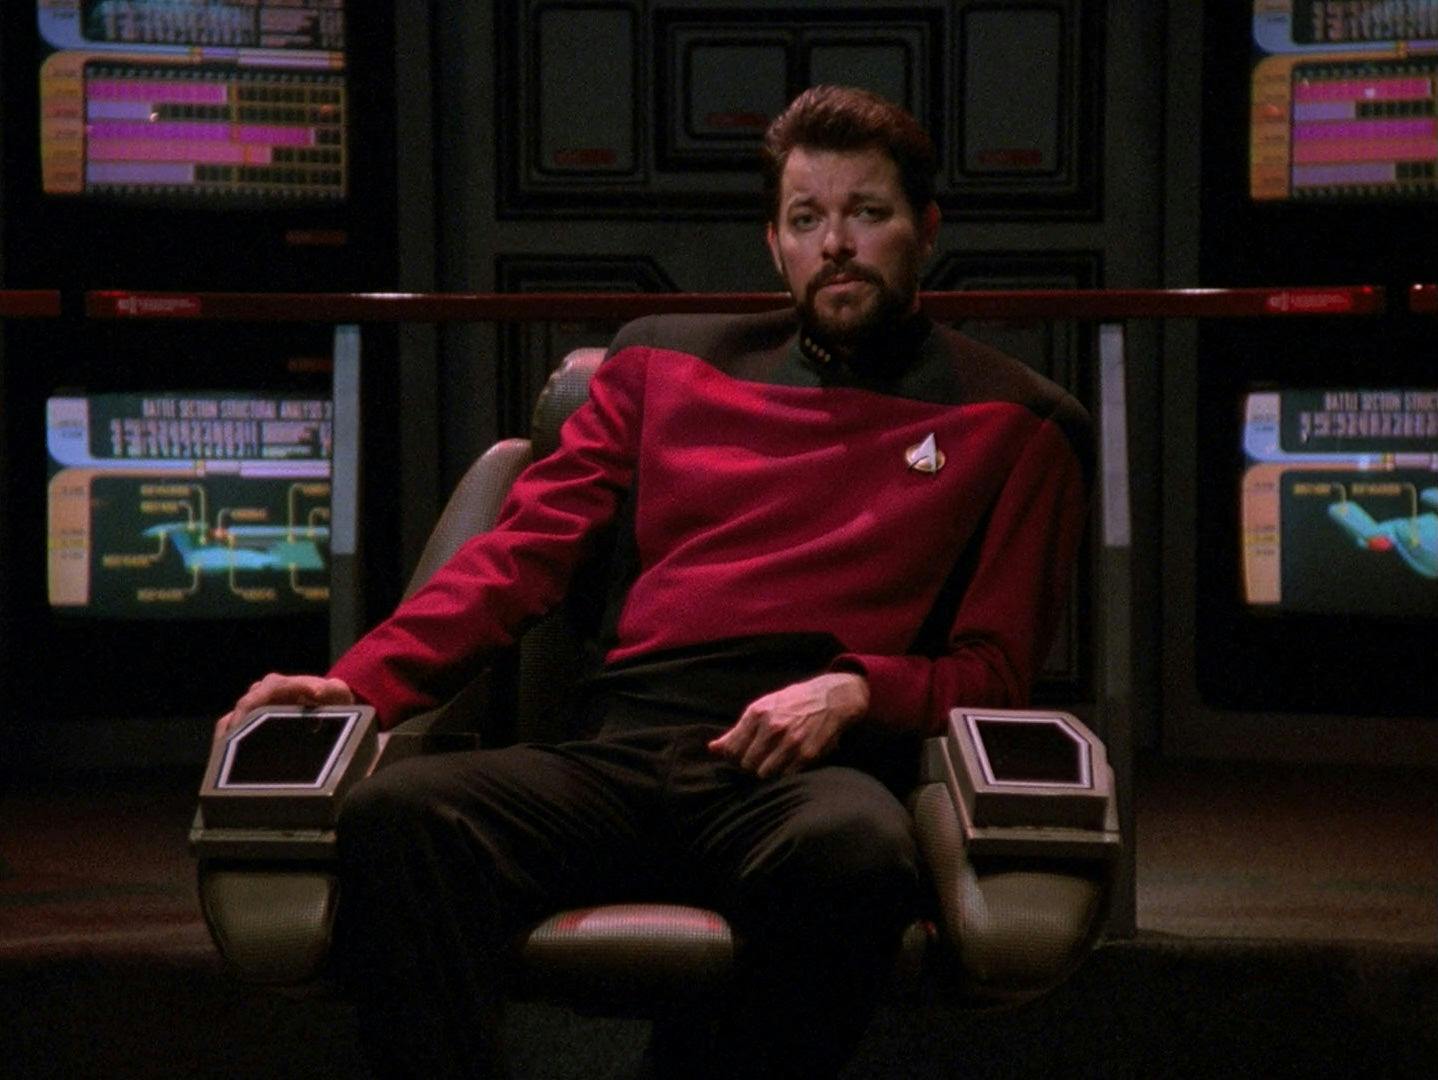 Riker assumes the role of captain in 